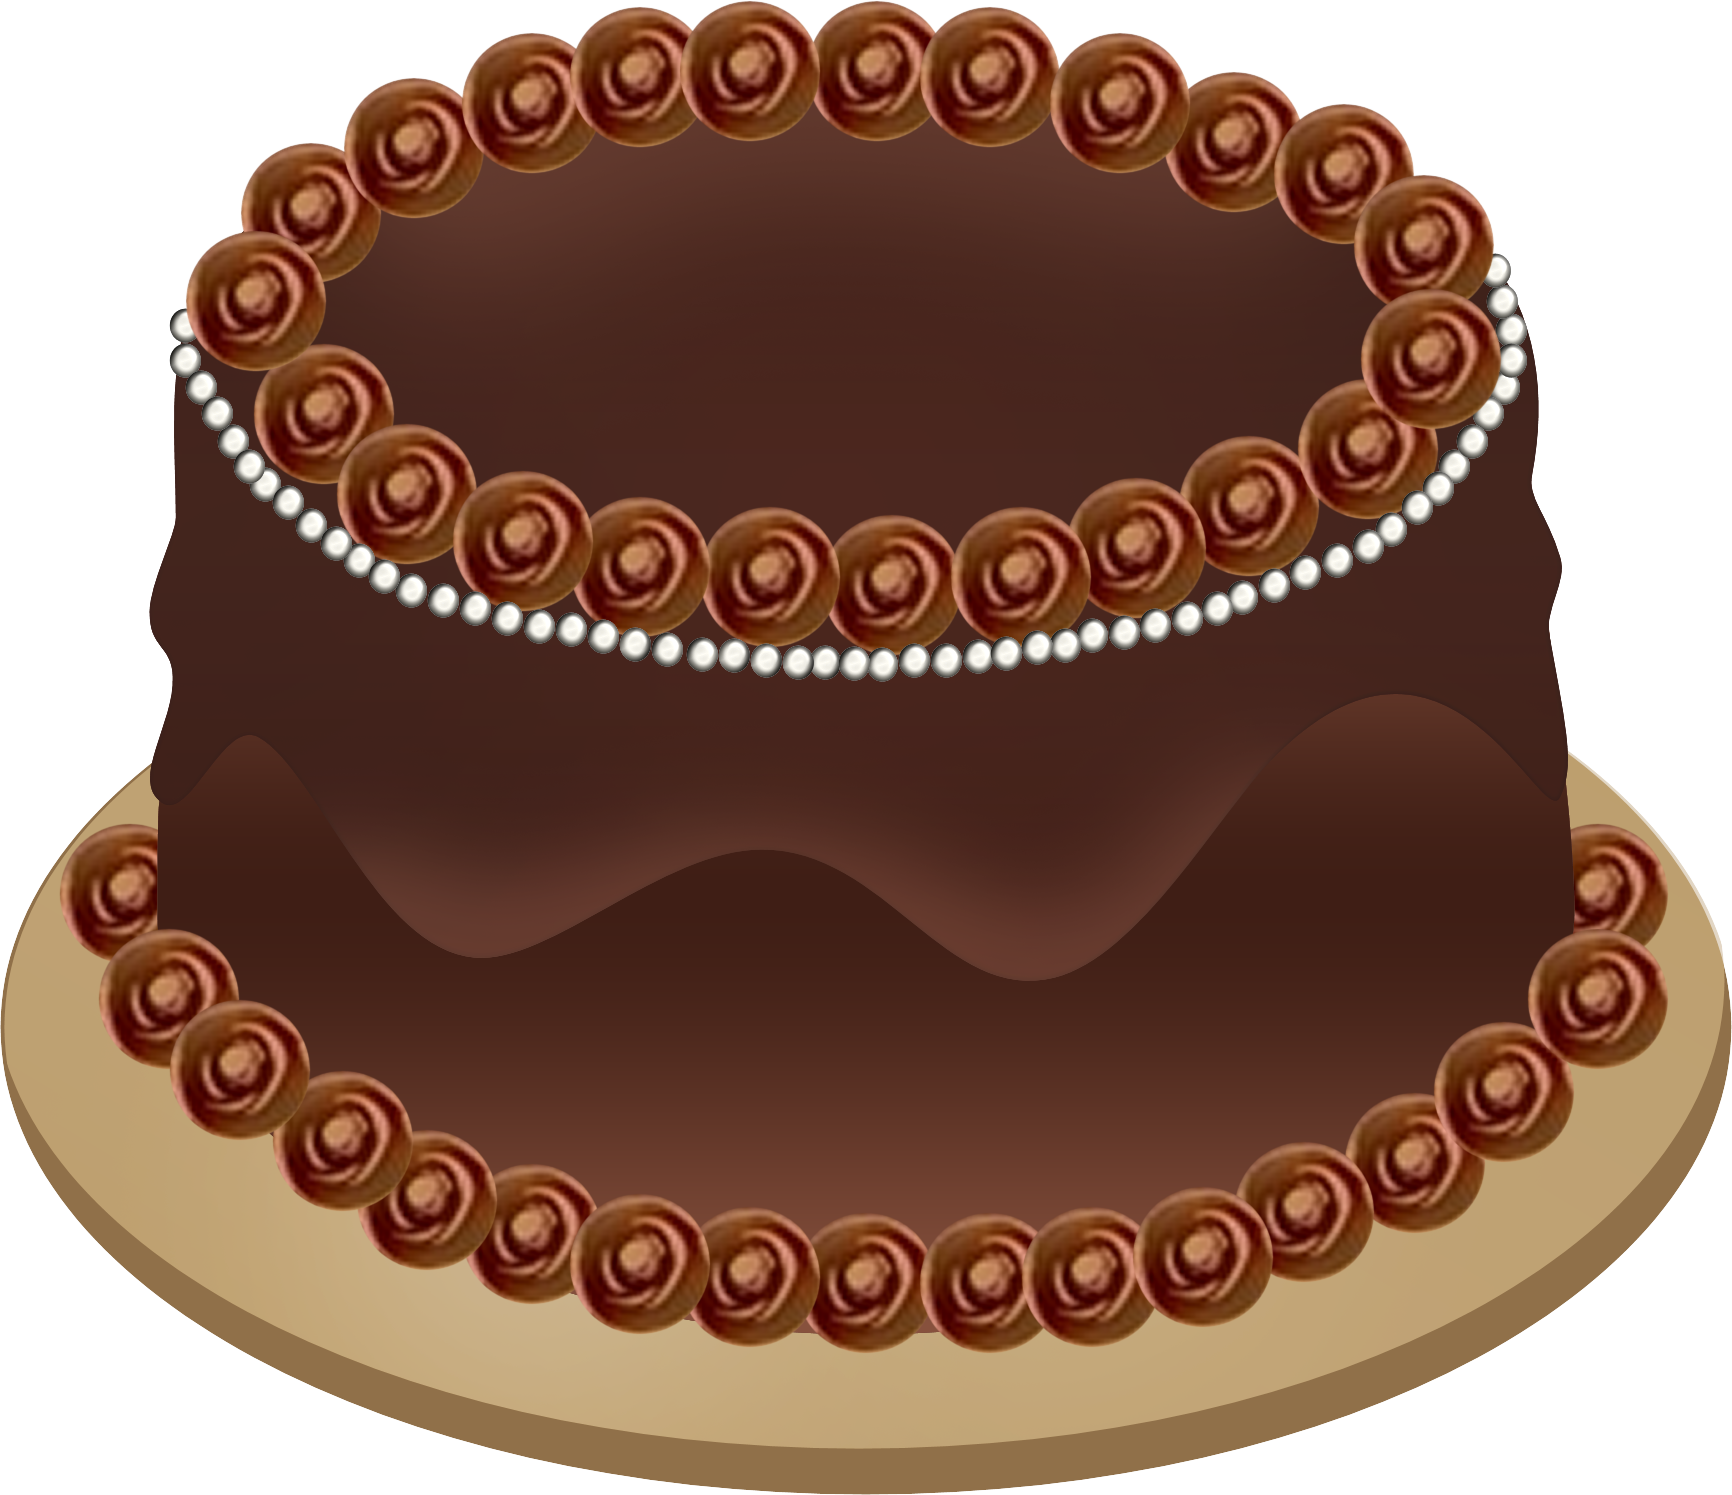 Chocolate Layer Cakewith Rosettes PNG